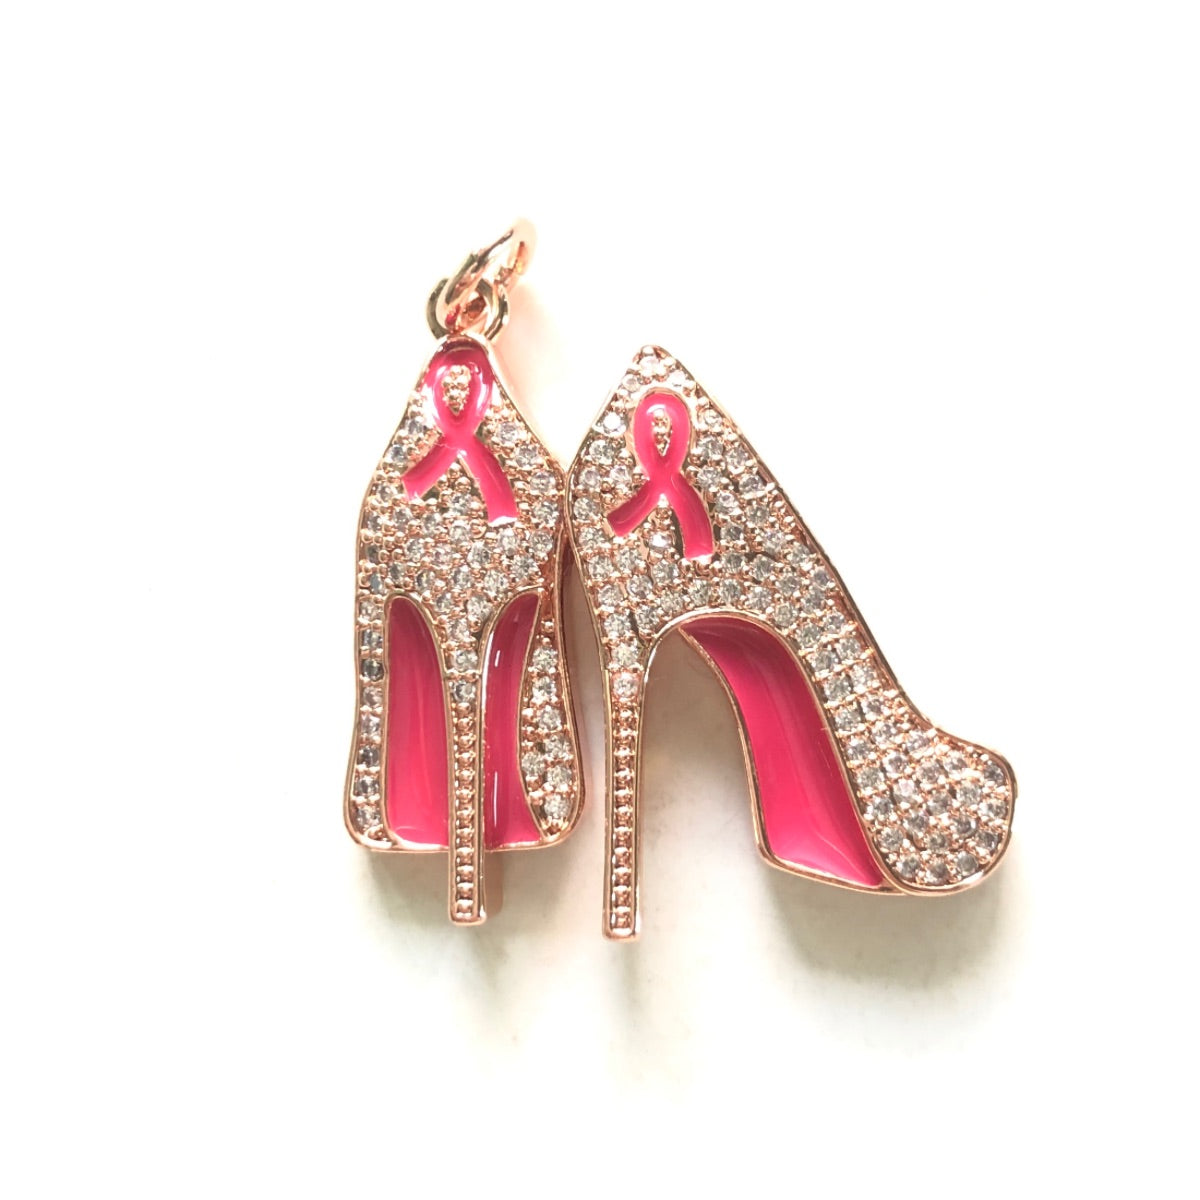 10pcs/lot CZ Pave Pink Ribbon High Heels Charms - Breast Cancer Awareness Rose Gold CZ Paved Charms Breast Cancer Awareness High Heels New Charms Arrivals Charms Beads Beyond